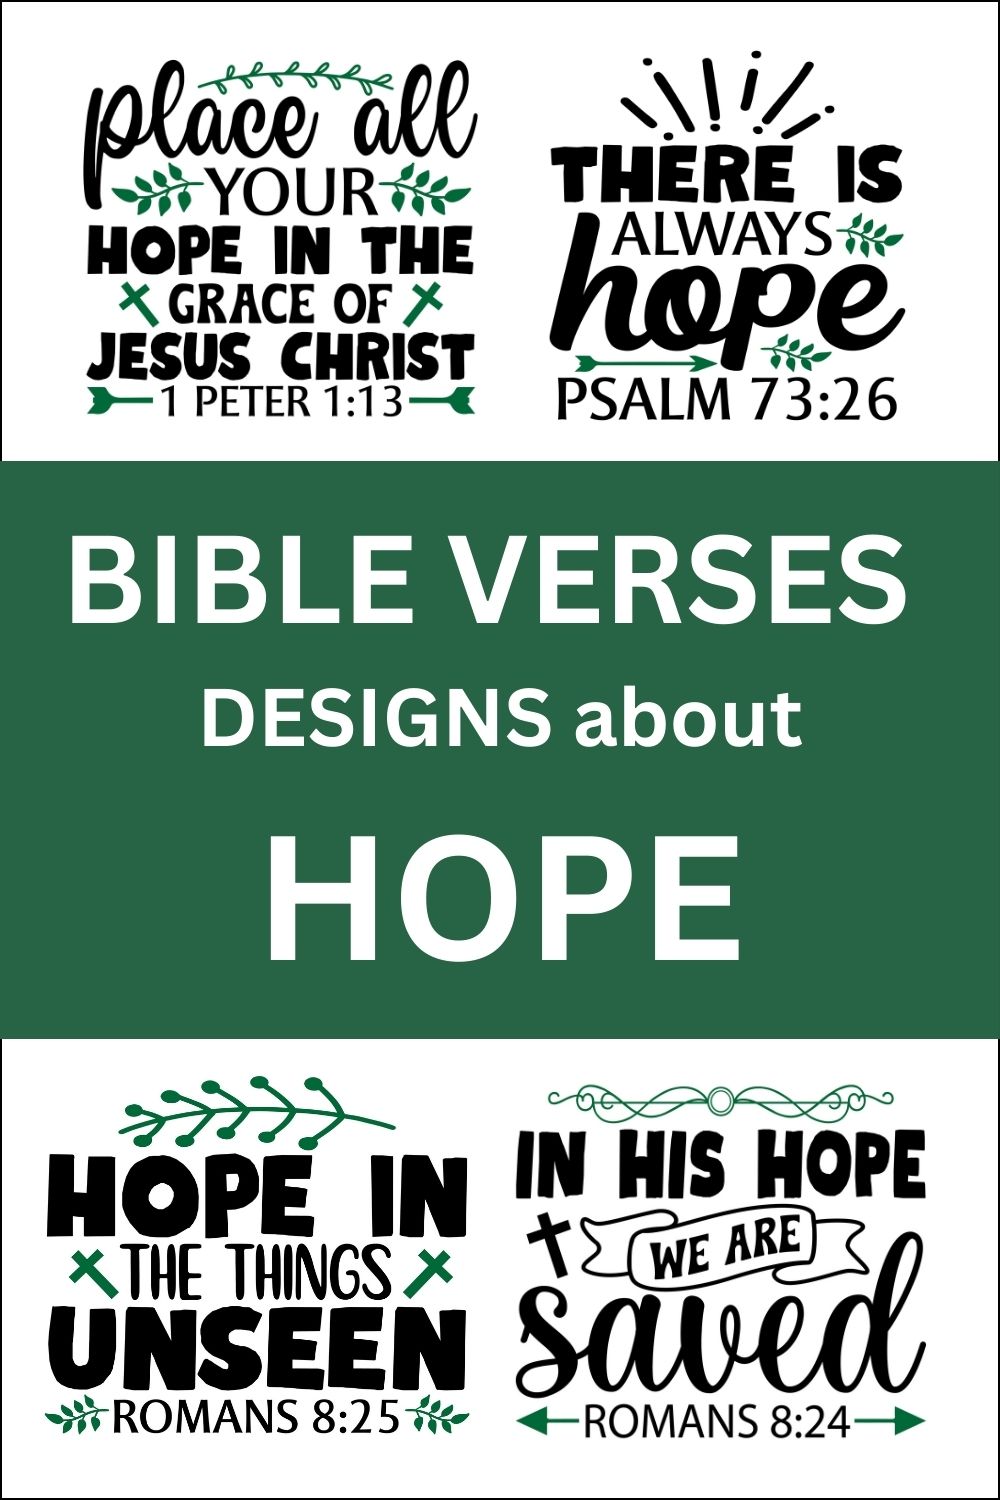 Free printable bundle of Bible Verses about hope, scripture passages, Cricut designs, DIY patterns, svg files, templates, clip art, stencils, silhouette, embroidery, cut files, design space, vector, crafts, laser cutting, and DIY crafts.